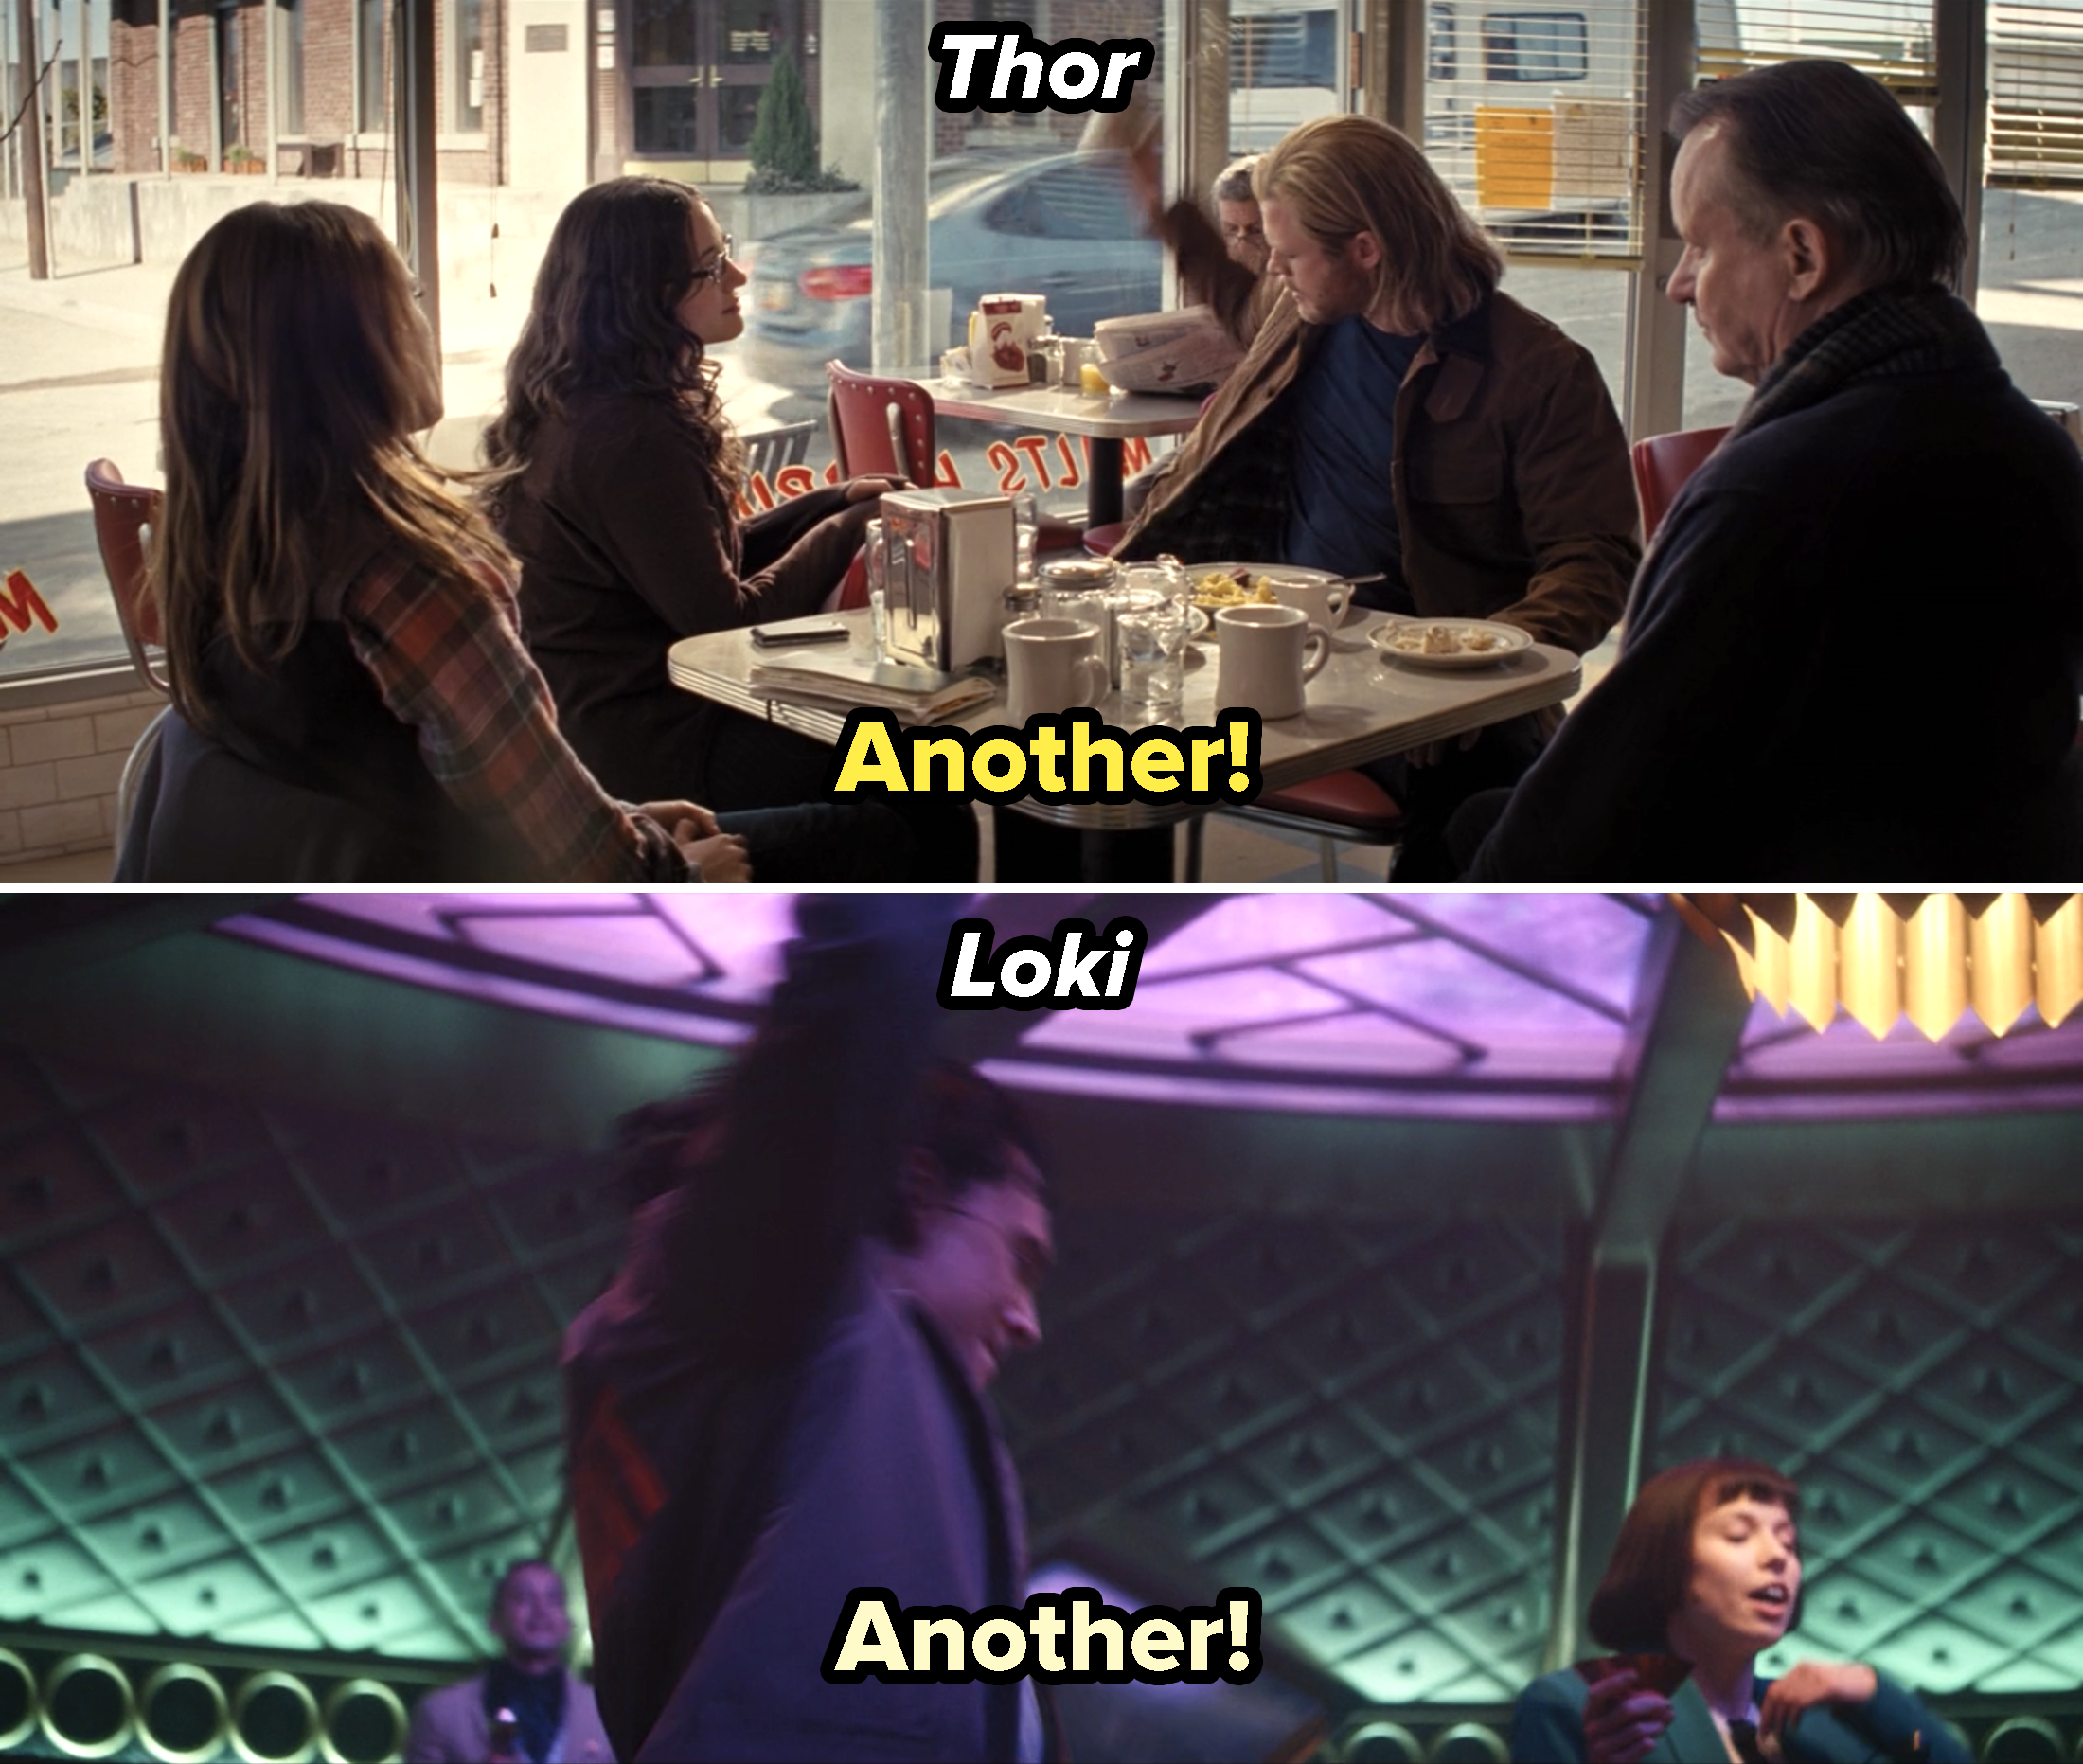 Thor and Loki yelling, &quot;Another,&quot; as they smash their cups